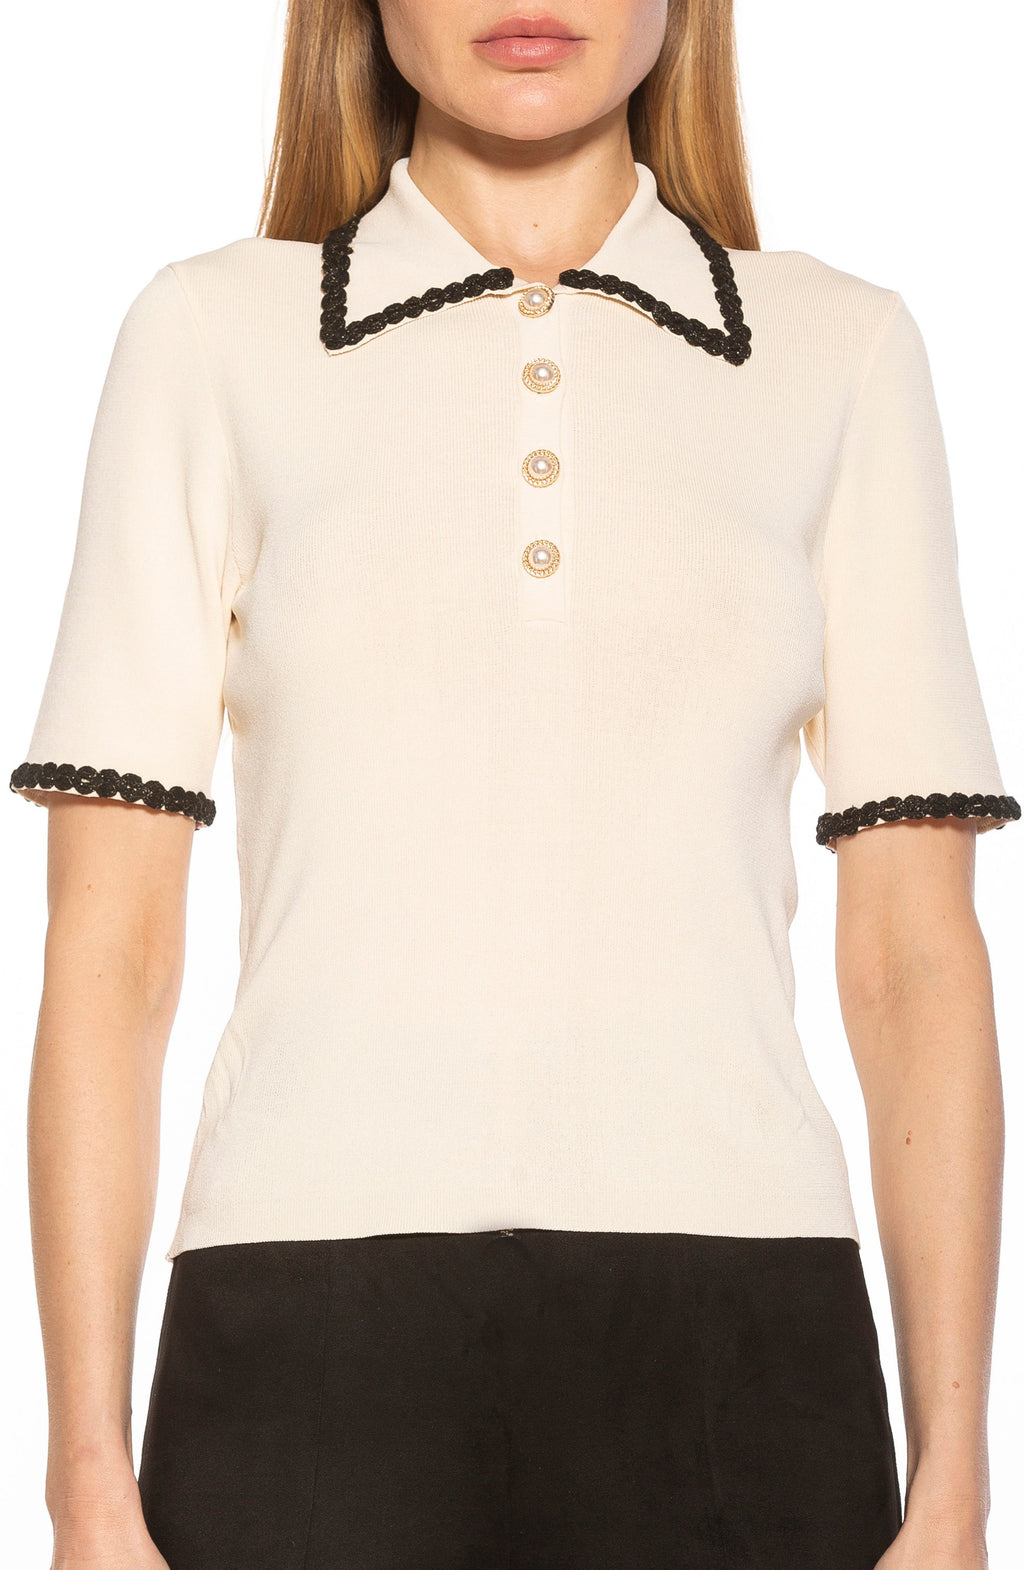 ALEXIA ADMOR Collared Knit Short Sleeve Top, Main, color, IVORY